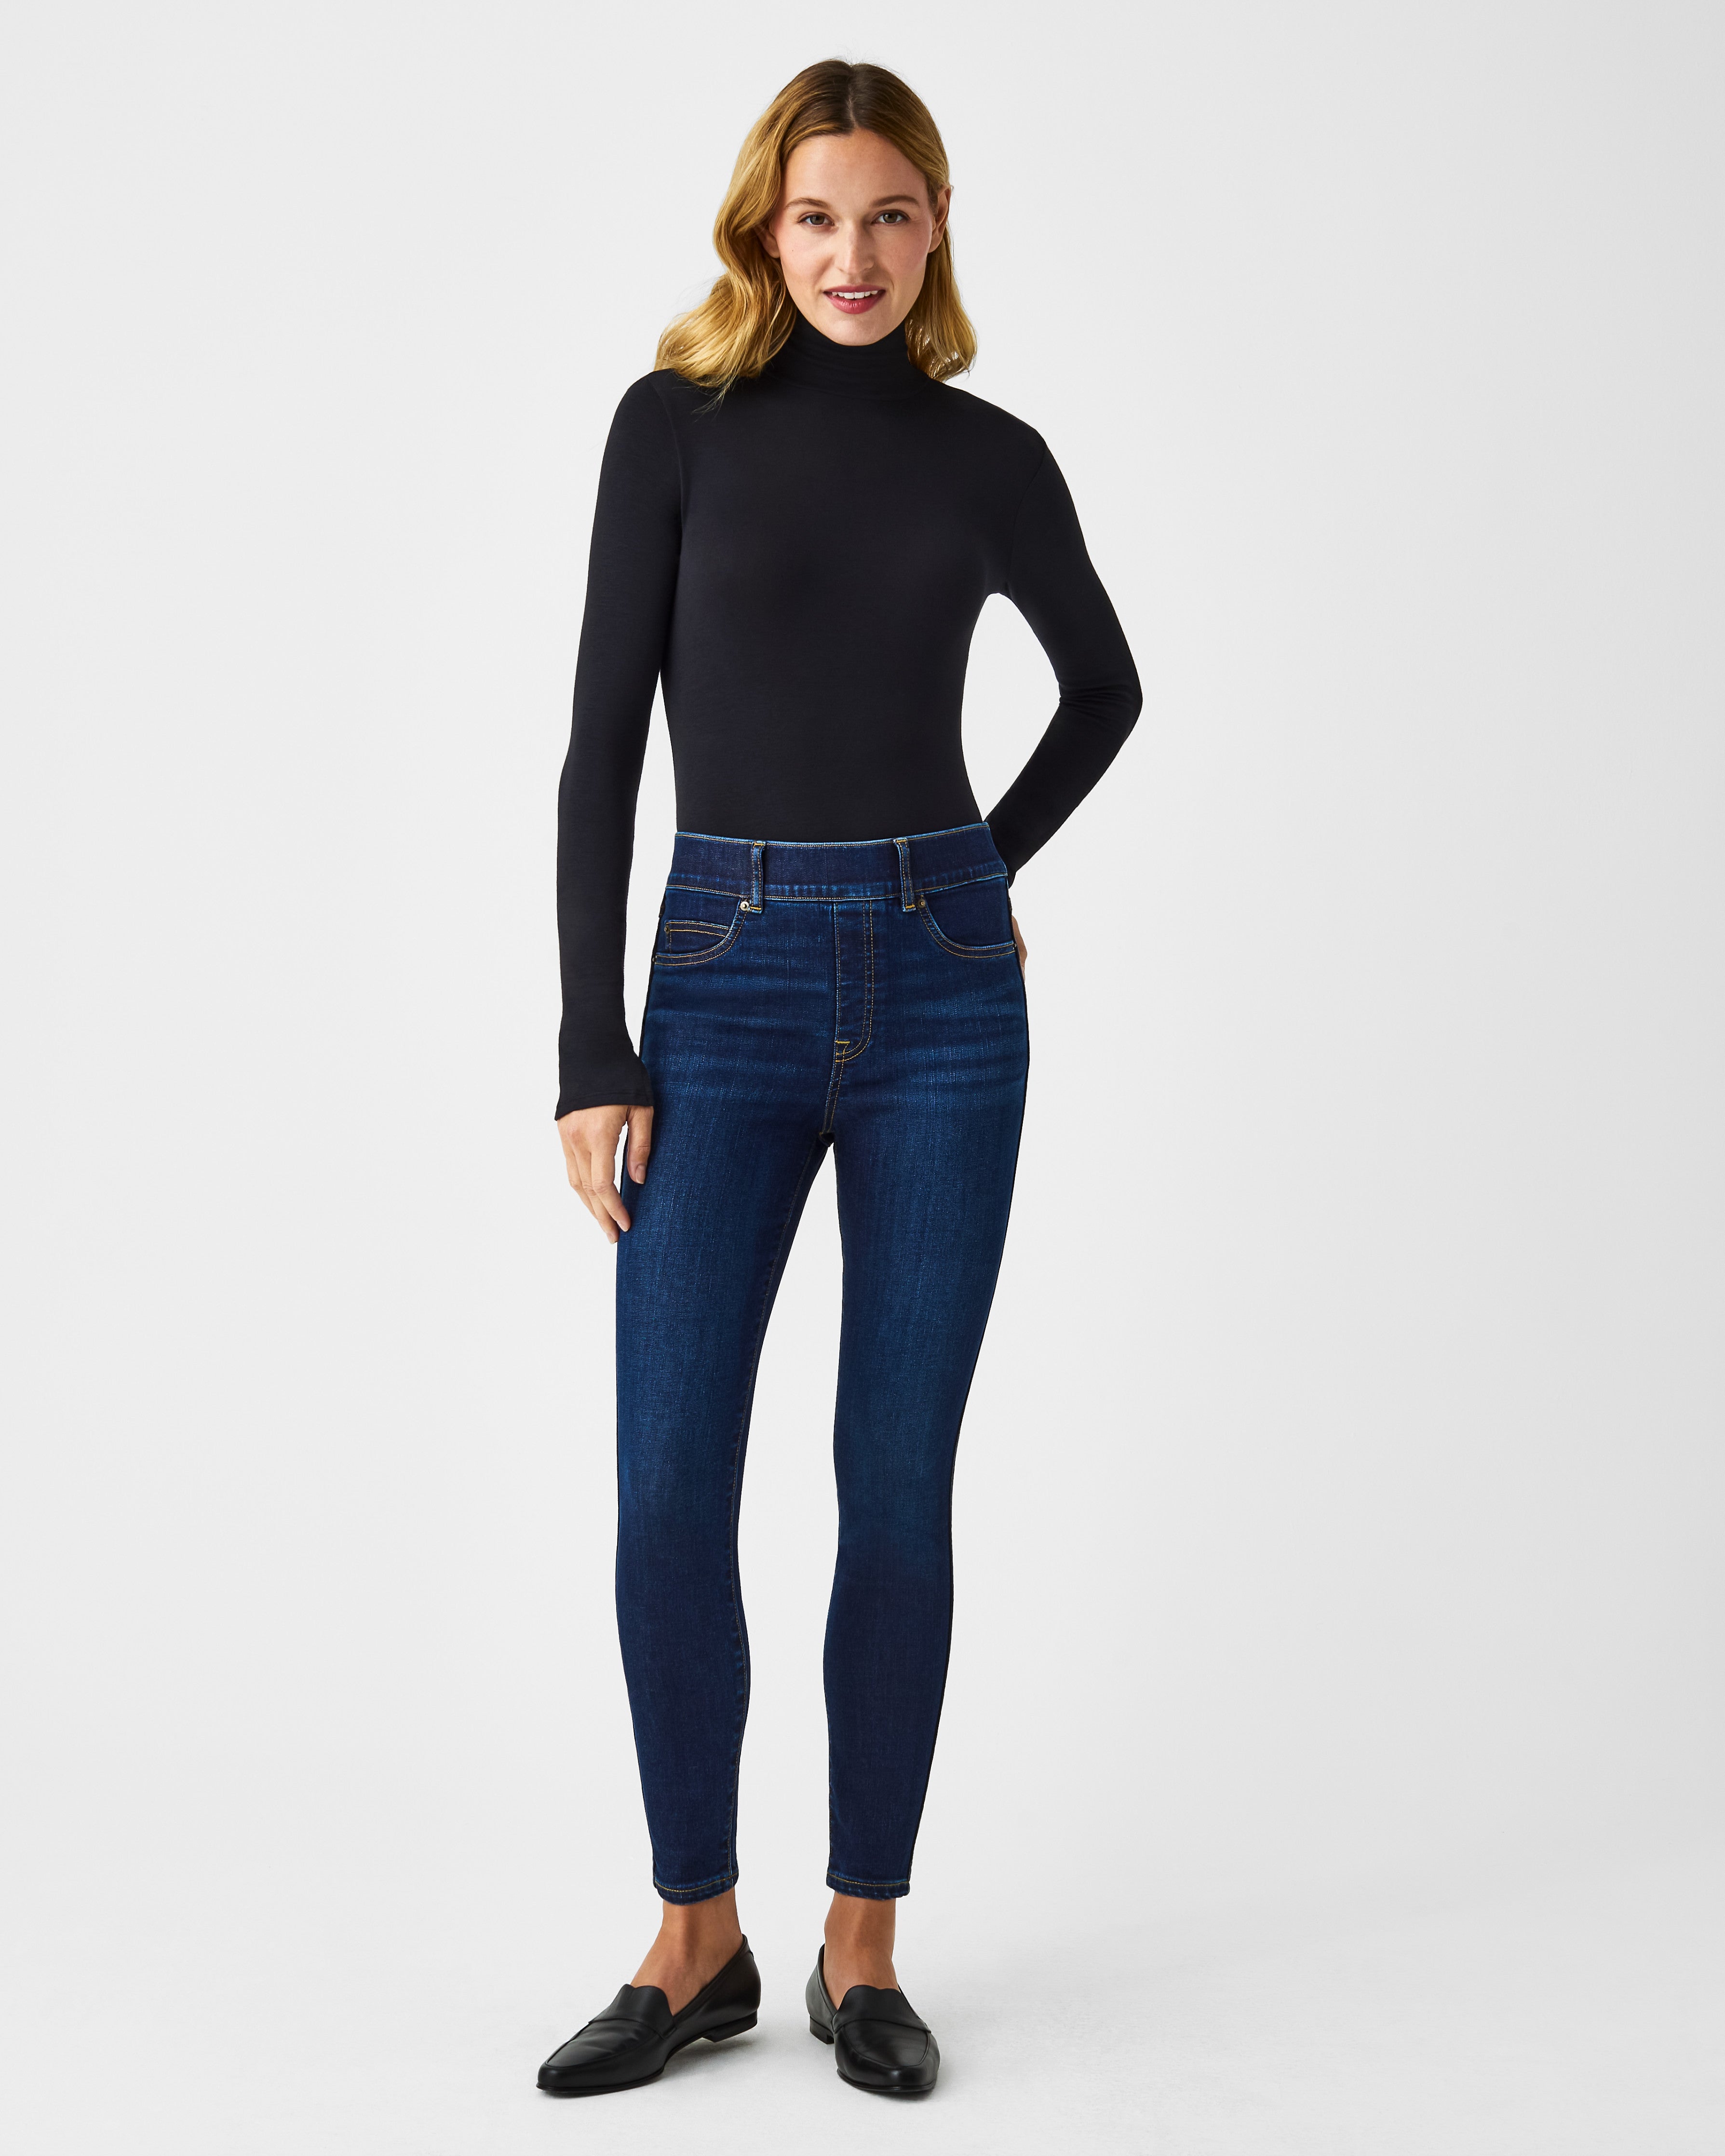 Retro Oversized Skinny Jeans With High Waist And Butt Lifting